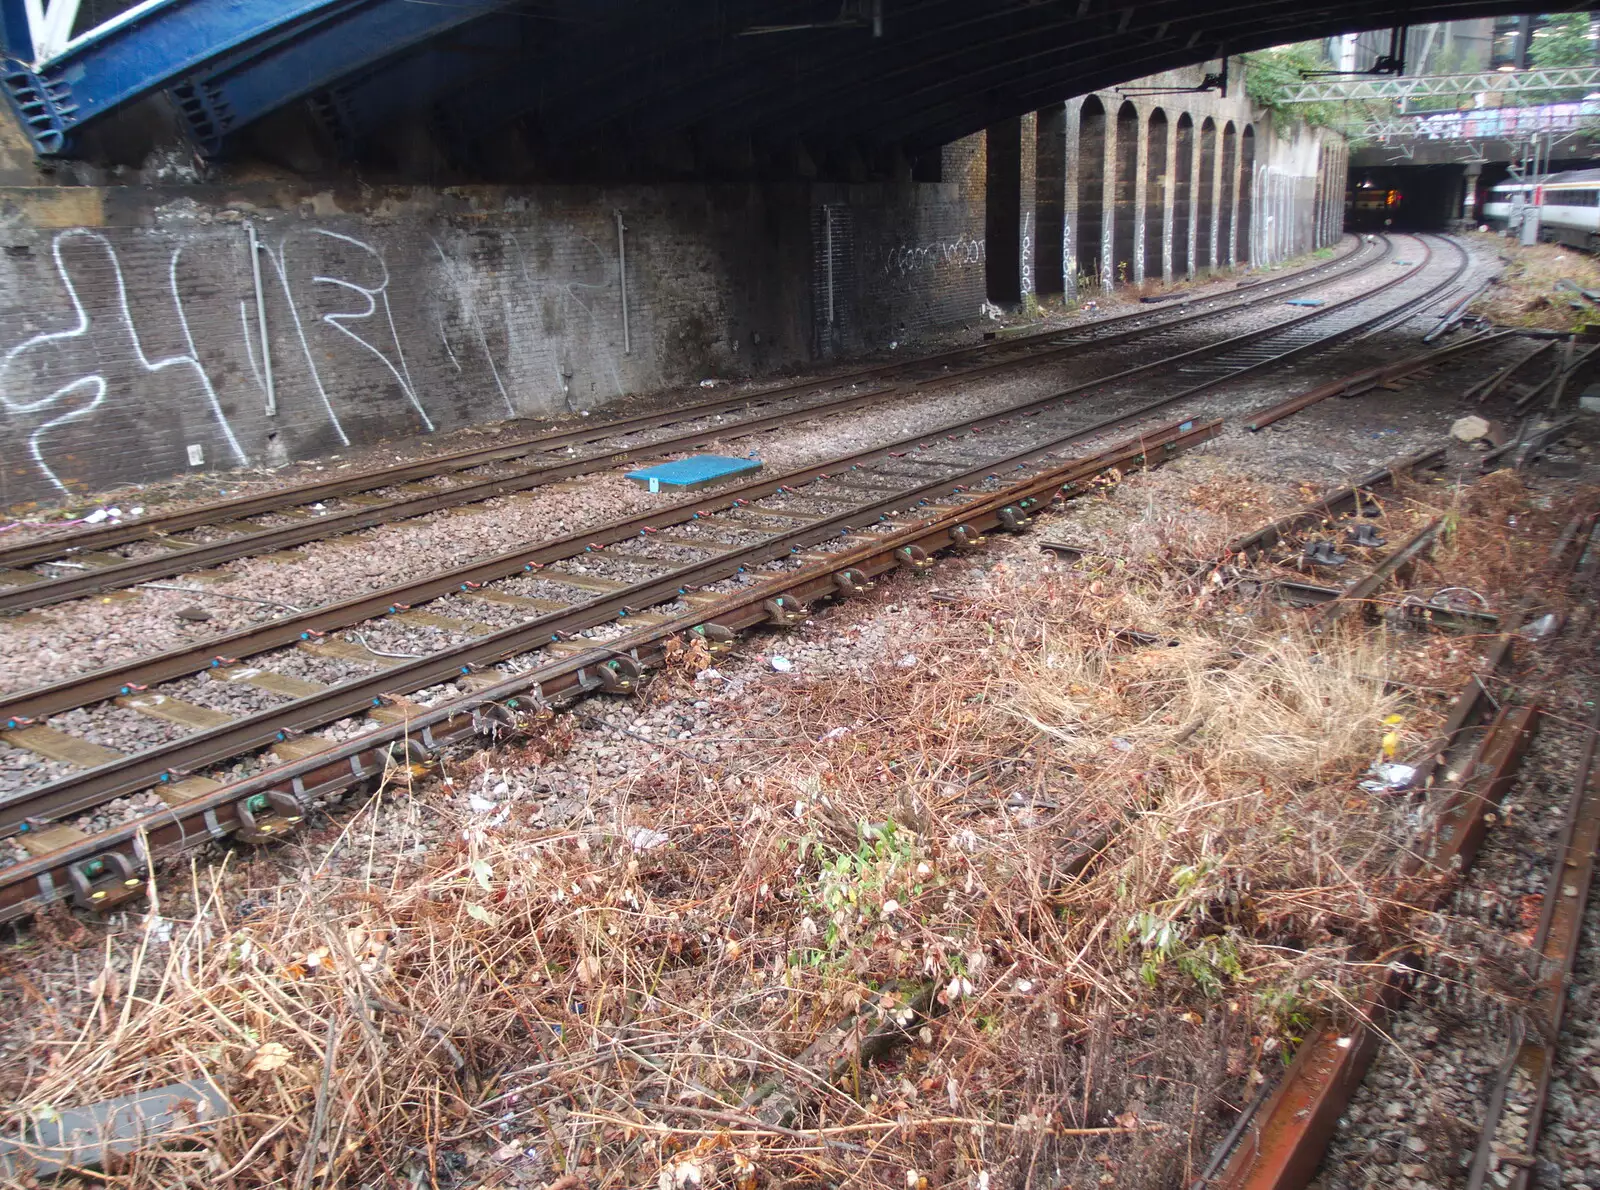 Parched weeds outside Liverpool Street station, from Fred's Birthday and a GSB Duck-Race Miscellany, Brome, Eye and London - 28th September 2019